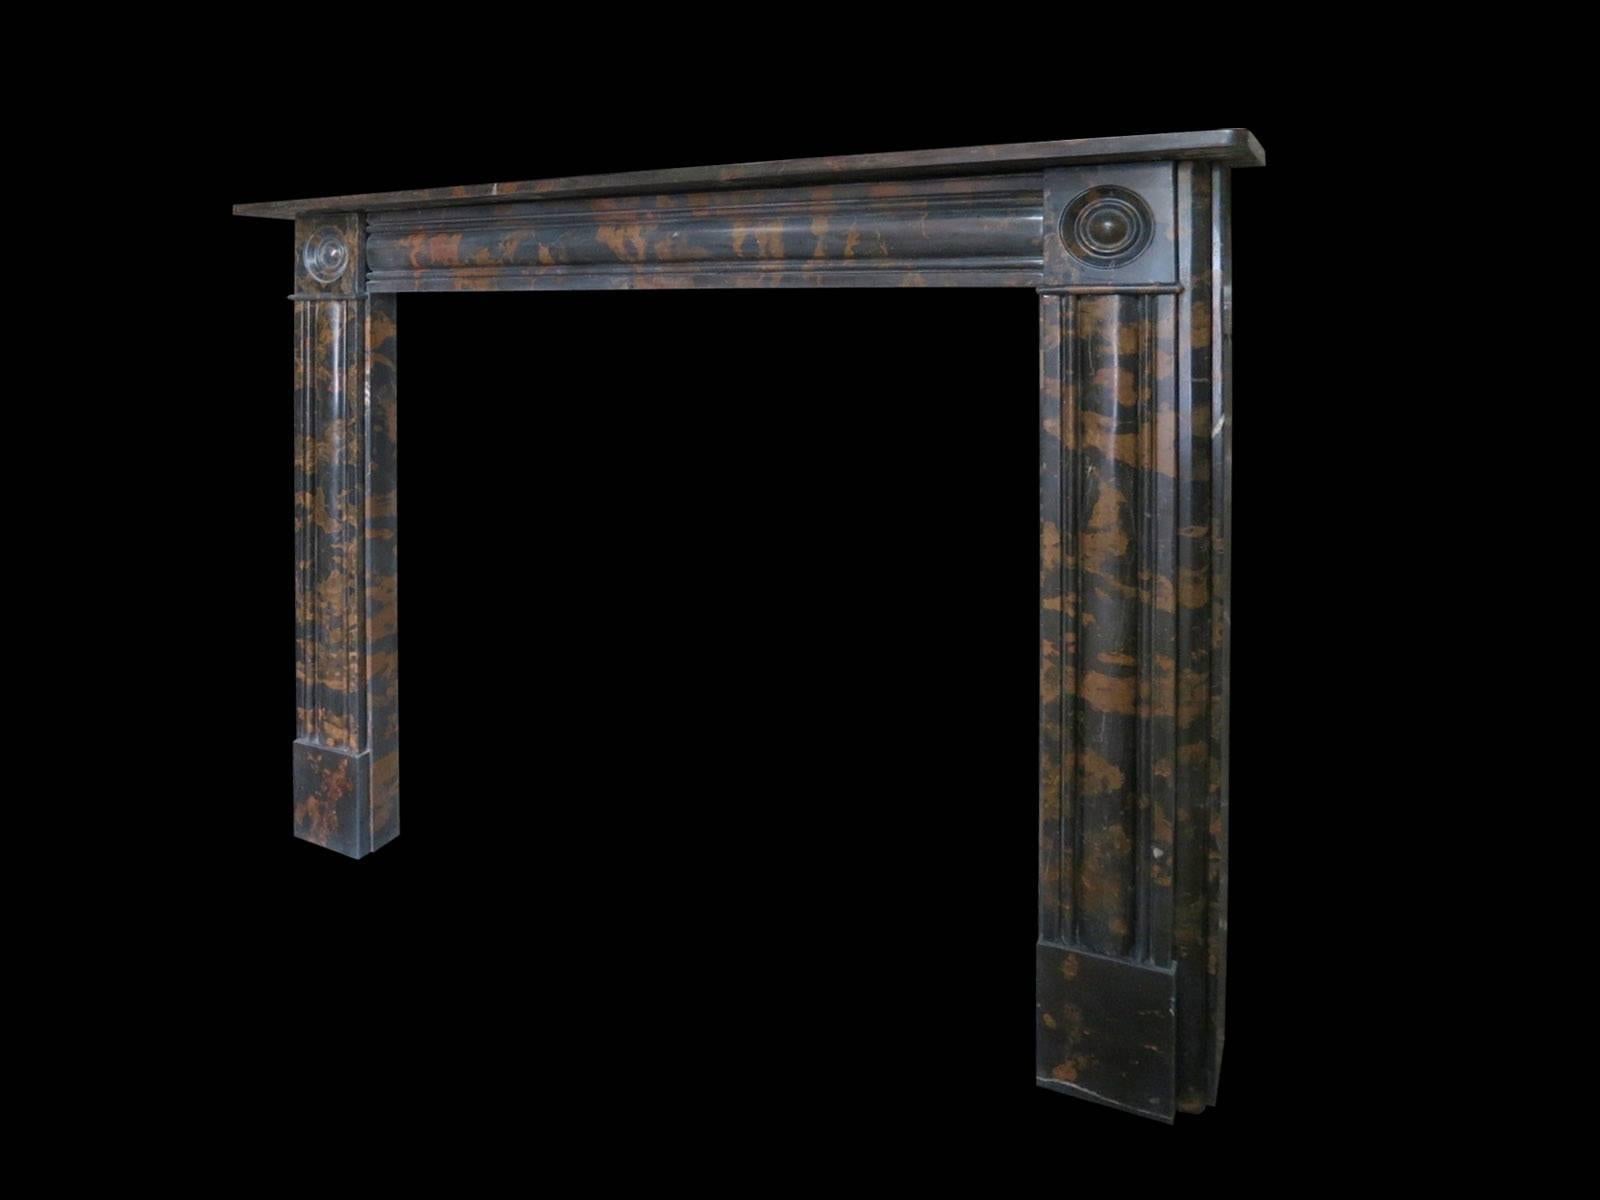 A reproduction early 19th century style mantel in a black and brown colored marble, with moulded panels to jambs and frieze. The corner blocks of carved roundels typical of that period, all beneath a simple mantel.
Measures:
97cm wide x 91cm high.